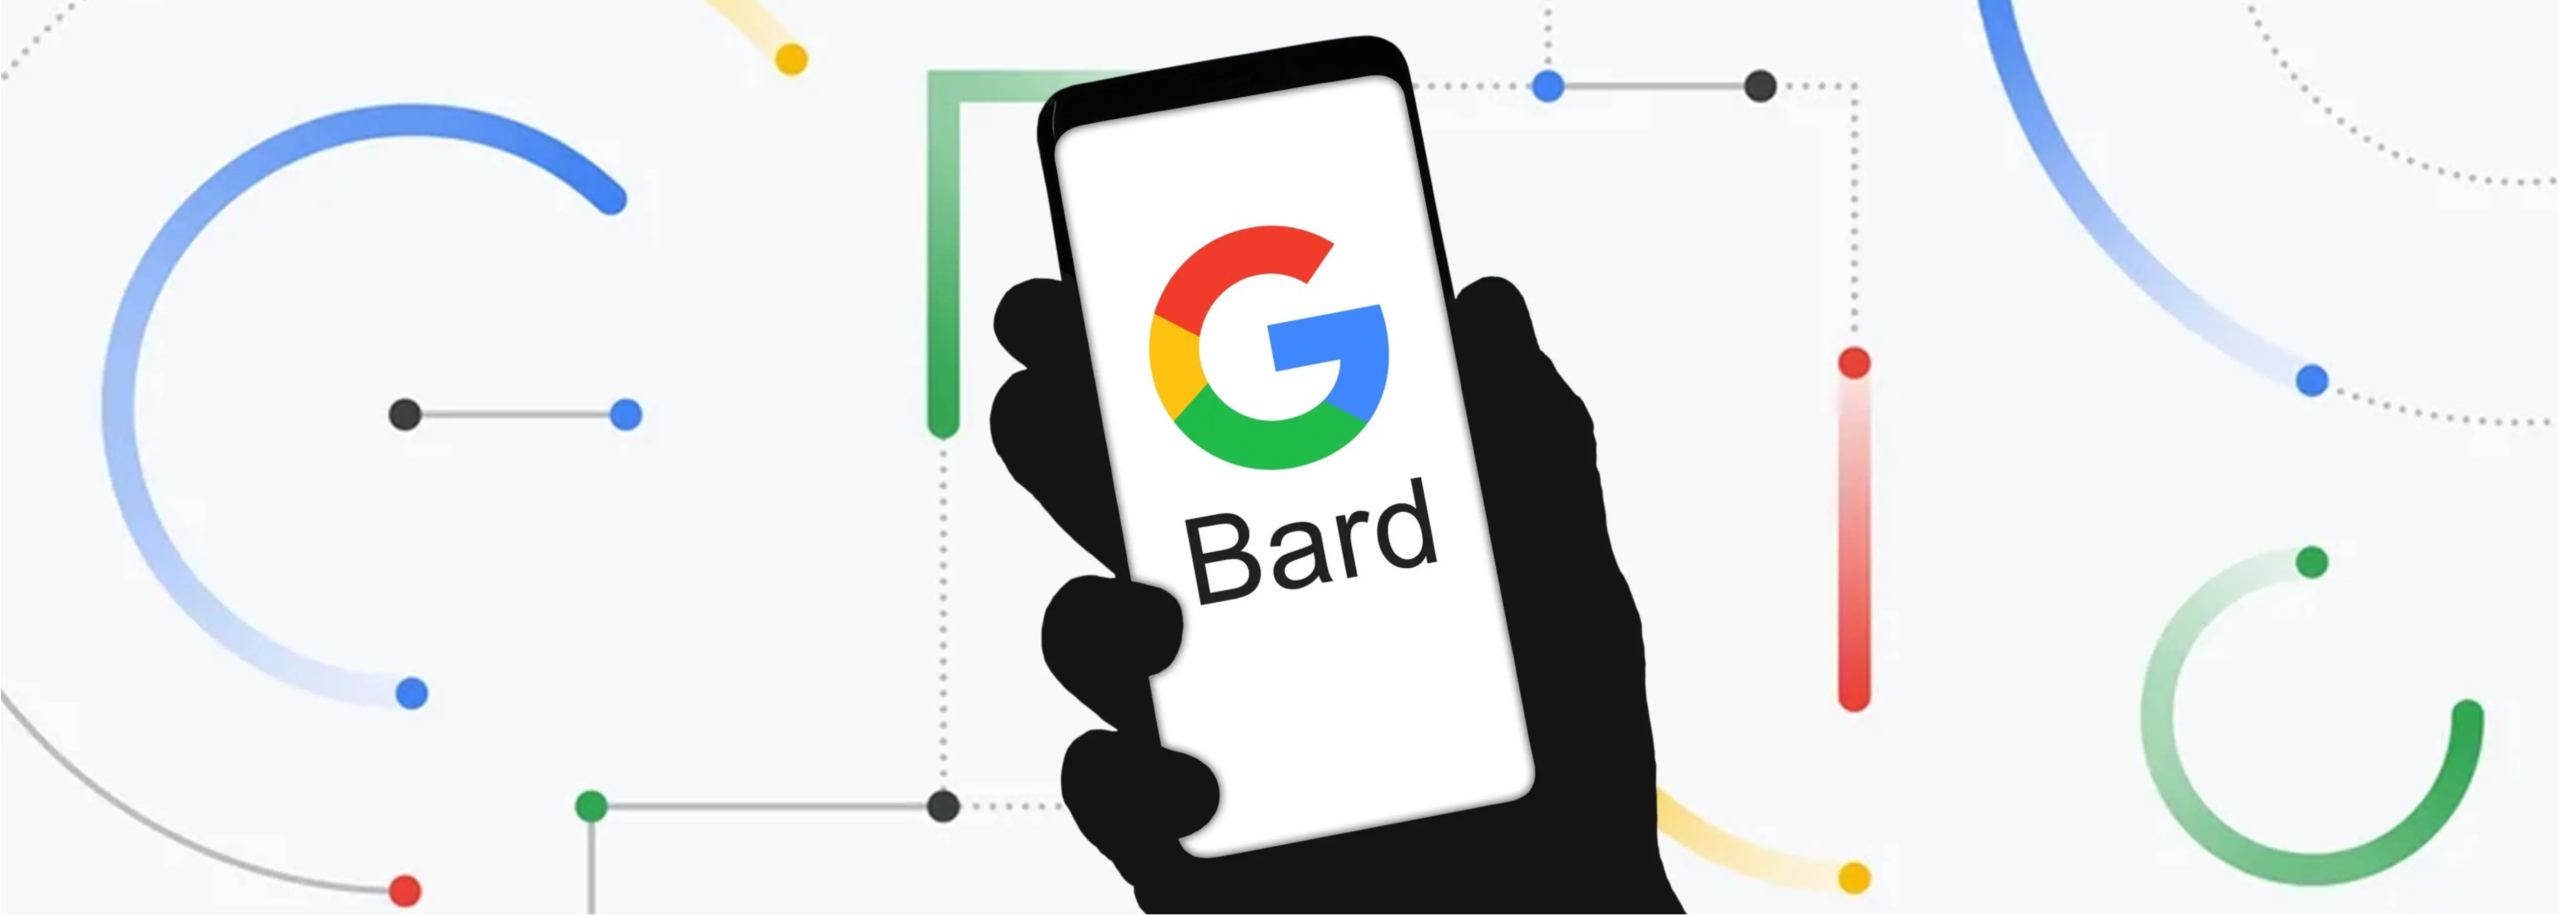 What does Google Bard AI do?